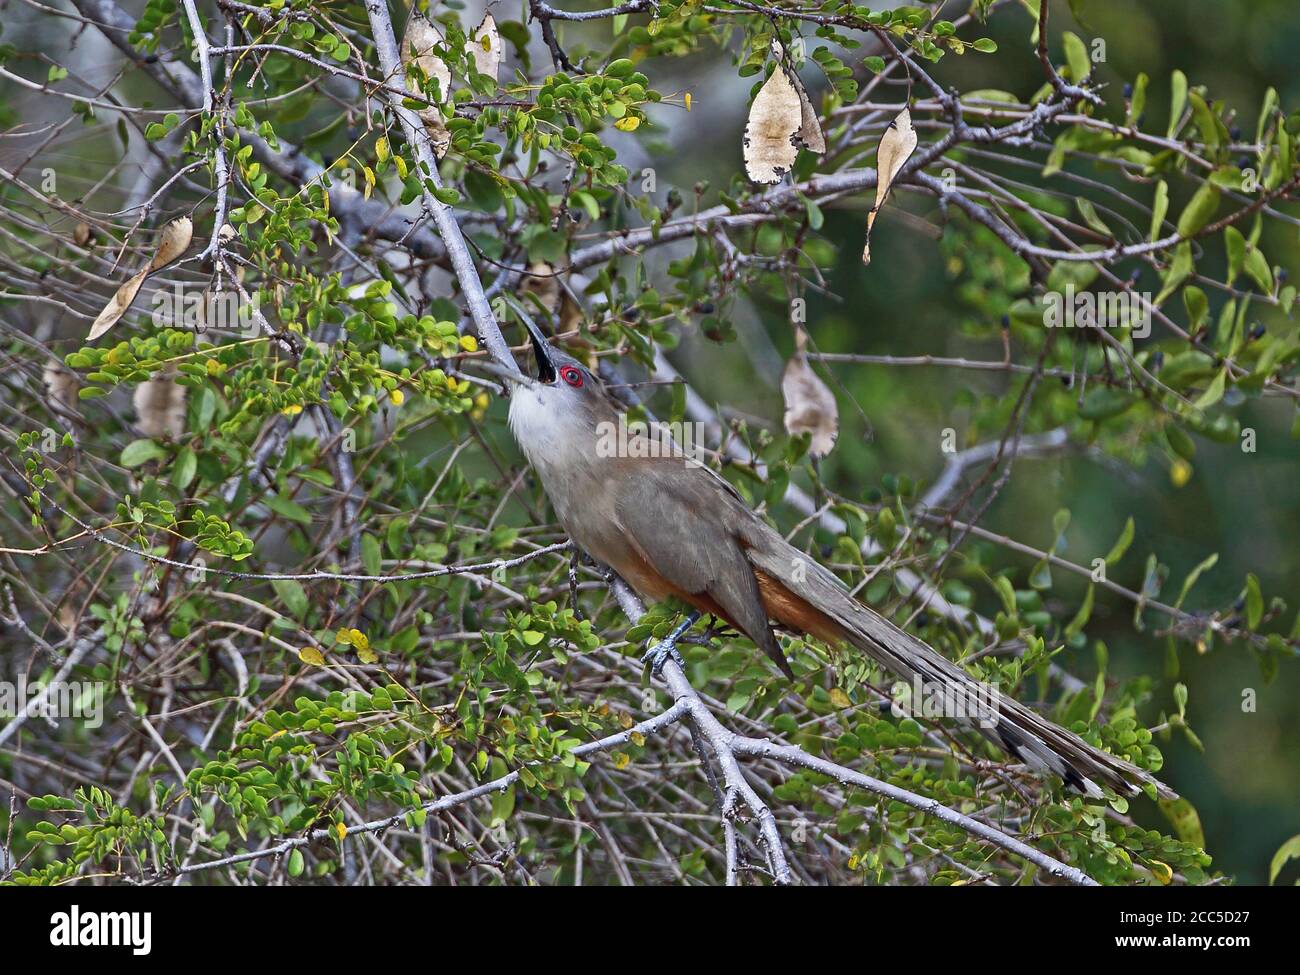 Great Lizard Cuckoo (Saurothera merlini merlini) adult perched on branch swallowing insect prey, Cuban endemic  La Belen, Cuba          March Stock Photo